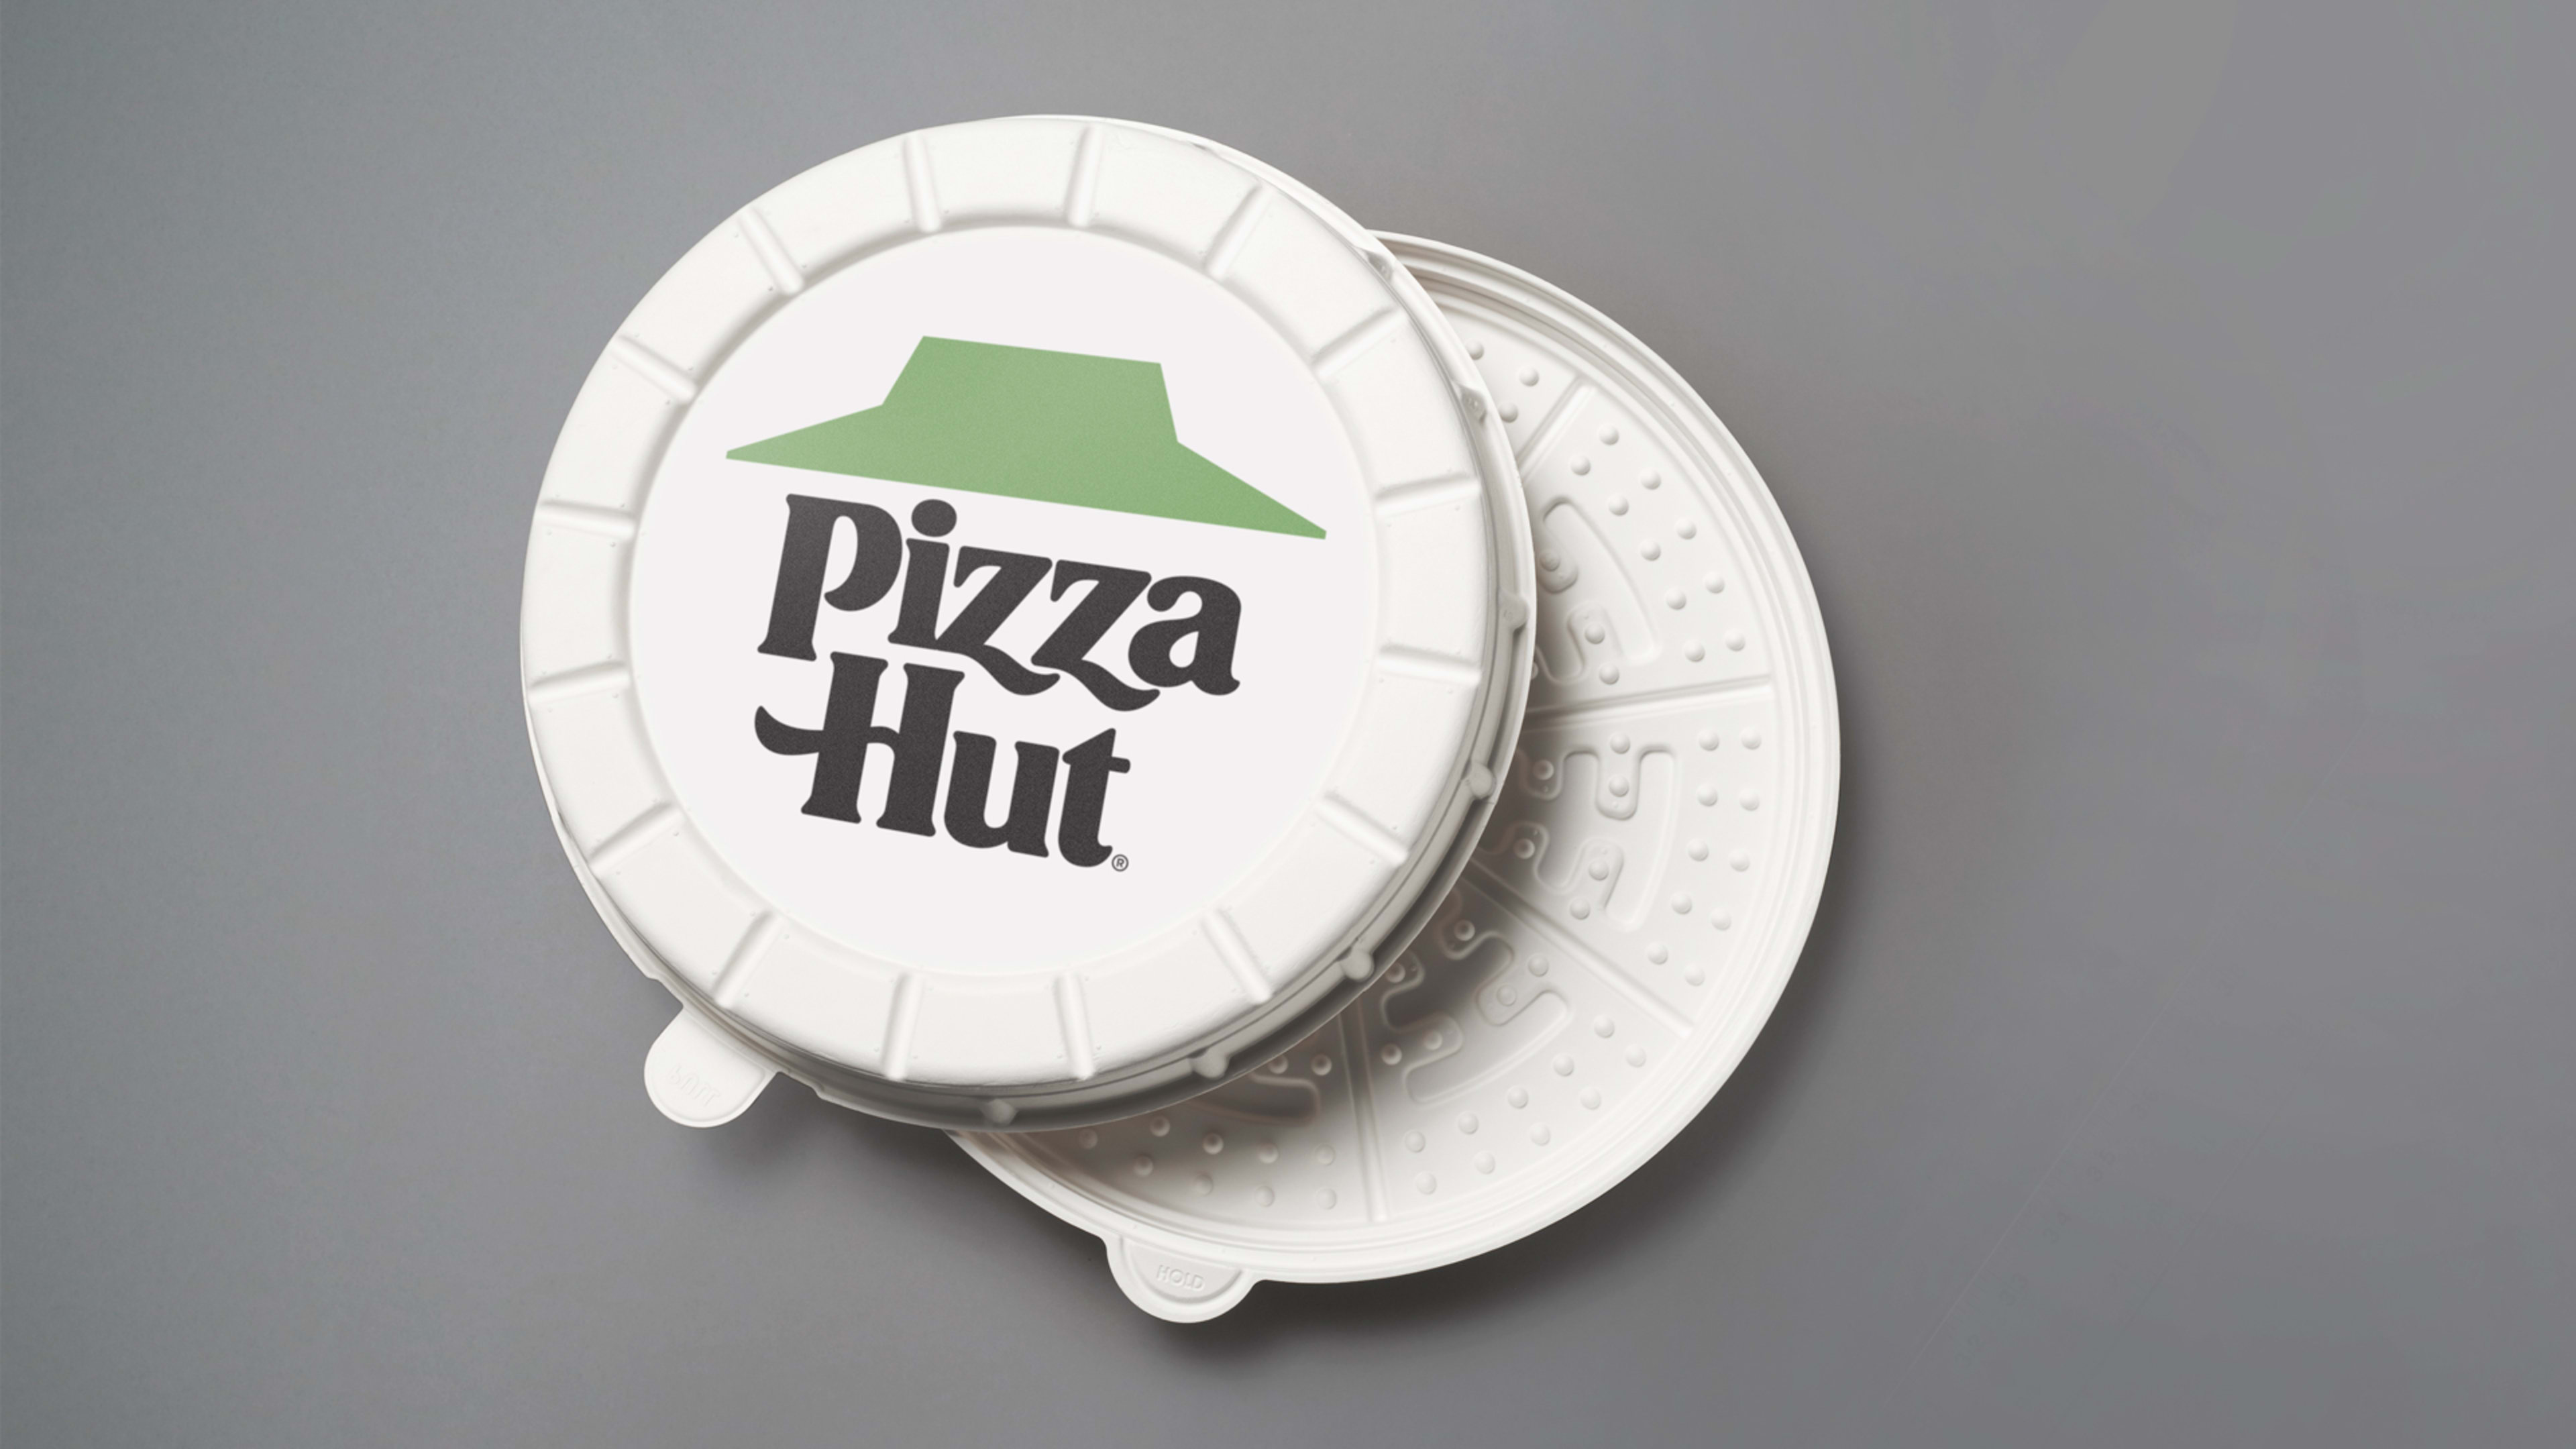 Two years in the making, Pizza Hut tests a round pizza box